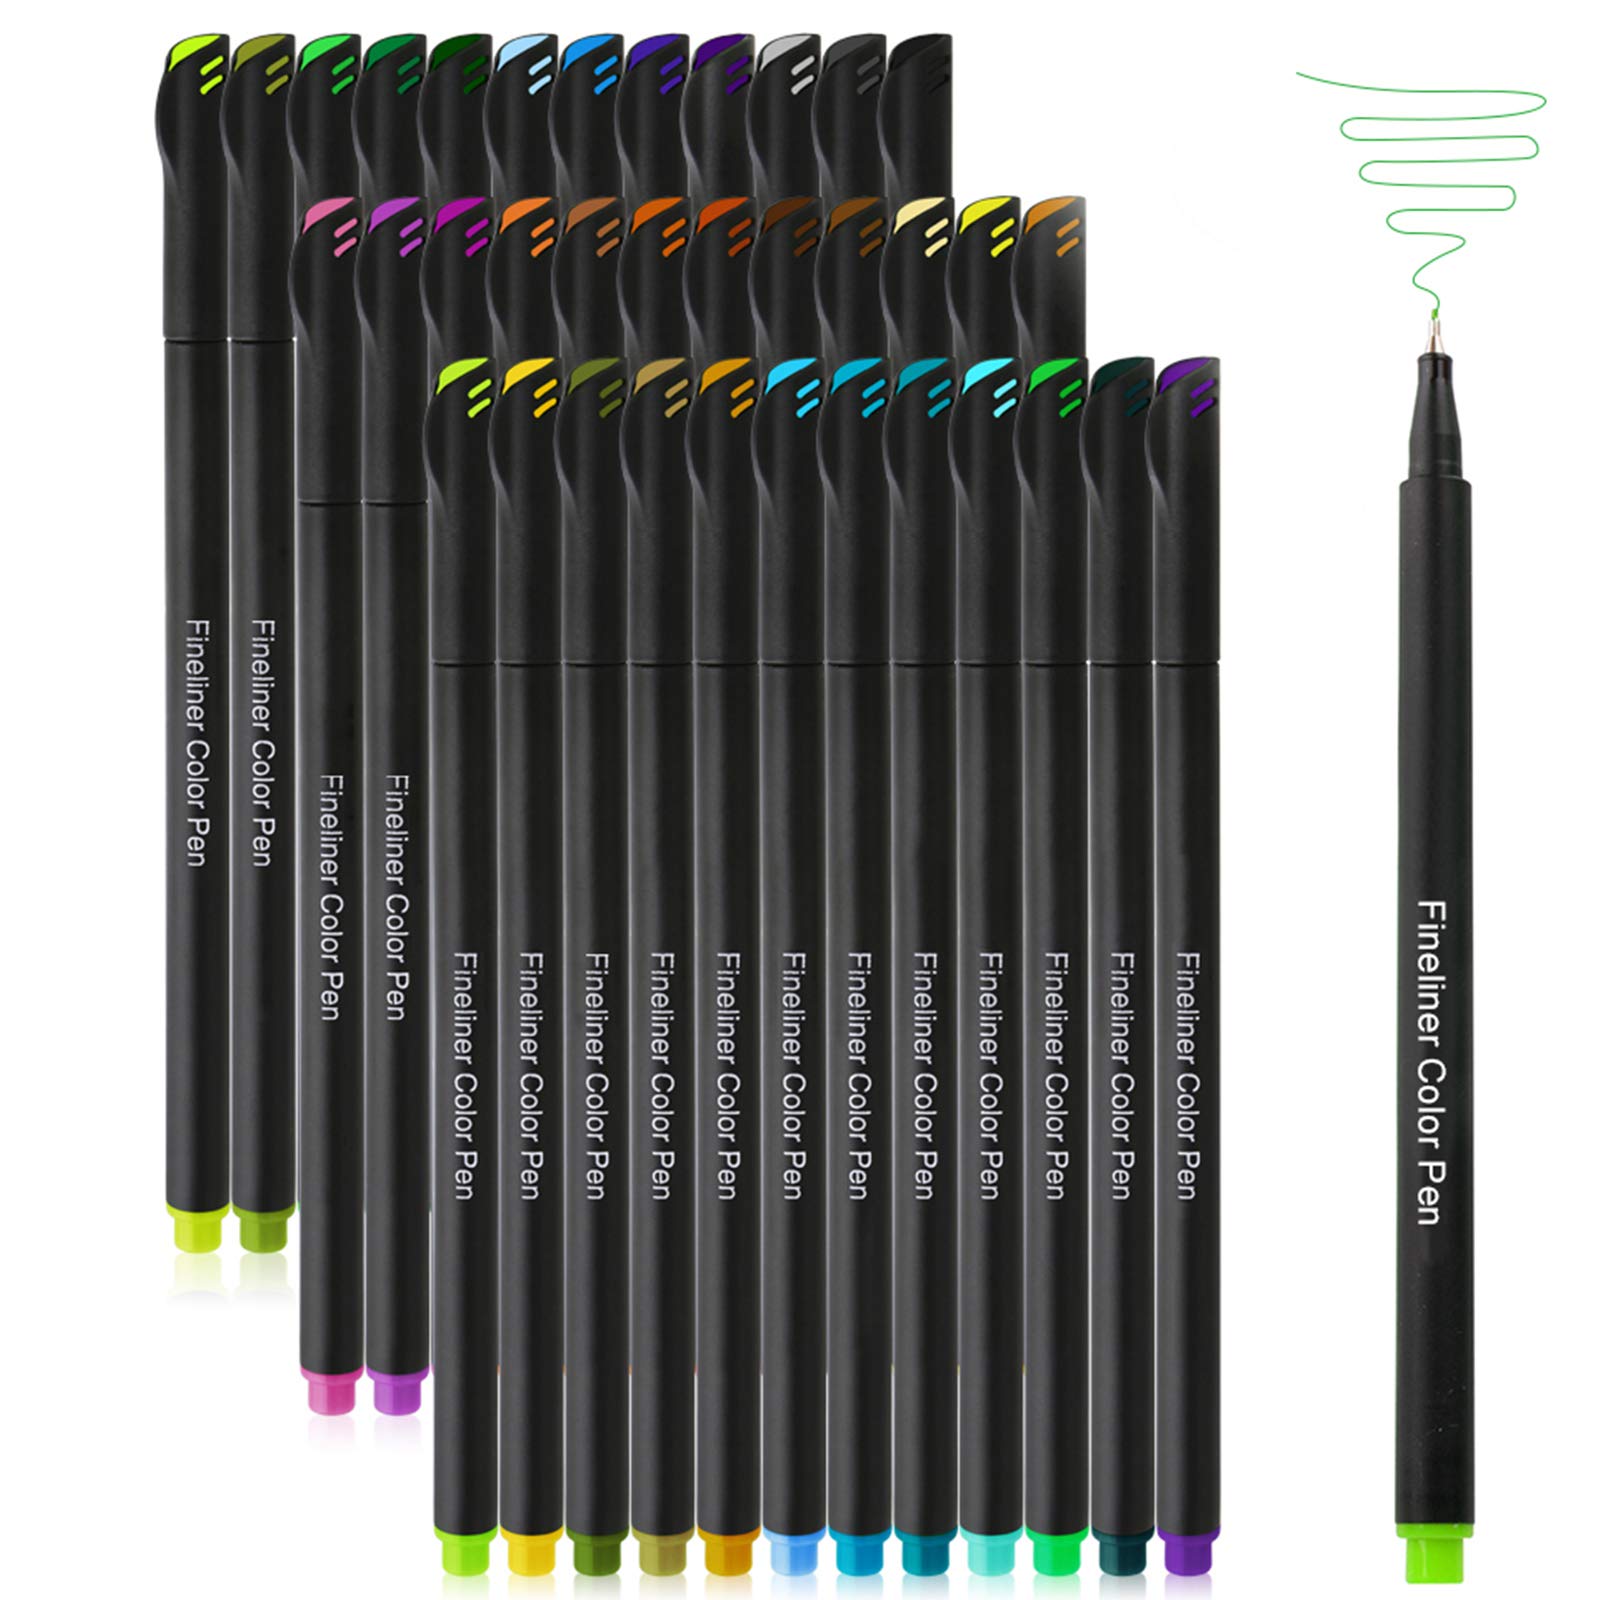 36 Colors Journal Planner Pens Colored Fine Point Markers Drawing Pens  Porous Fineliner Pen for Writing Note Taking Calendar Agenda Coloring - Art  School Office Supplies